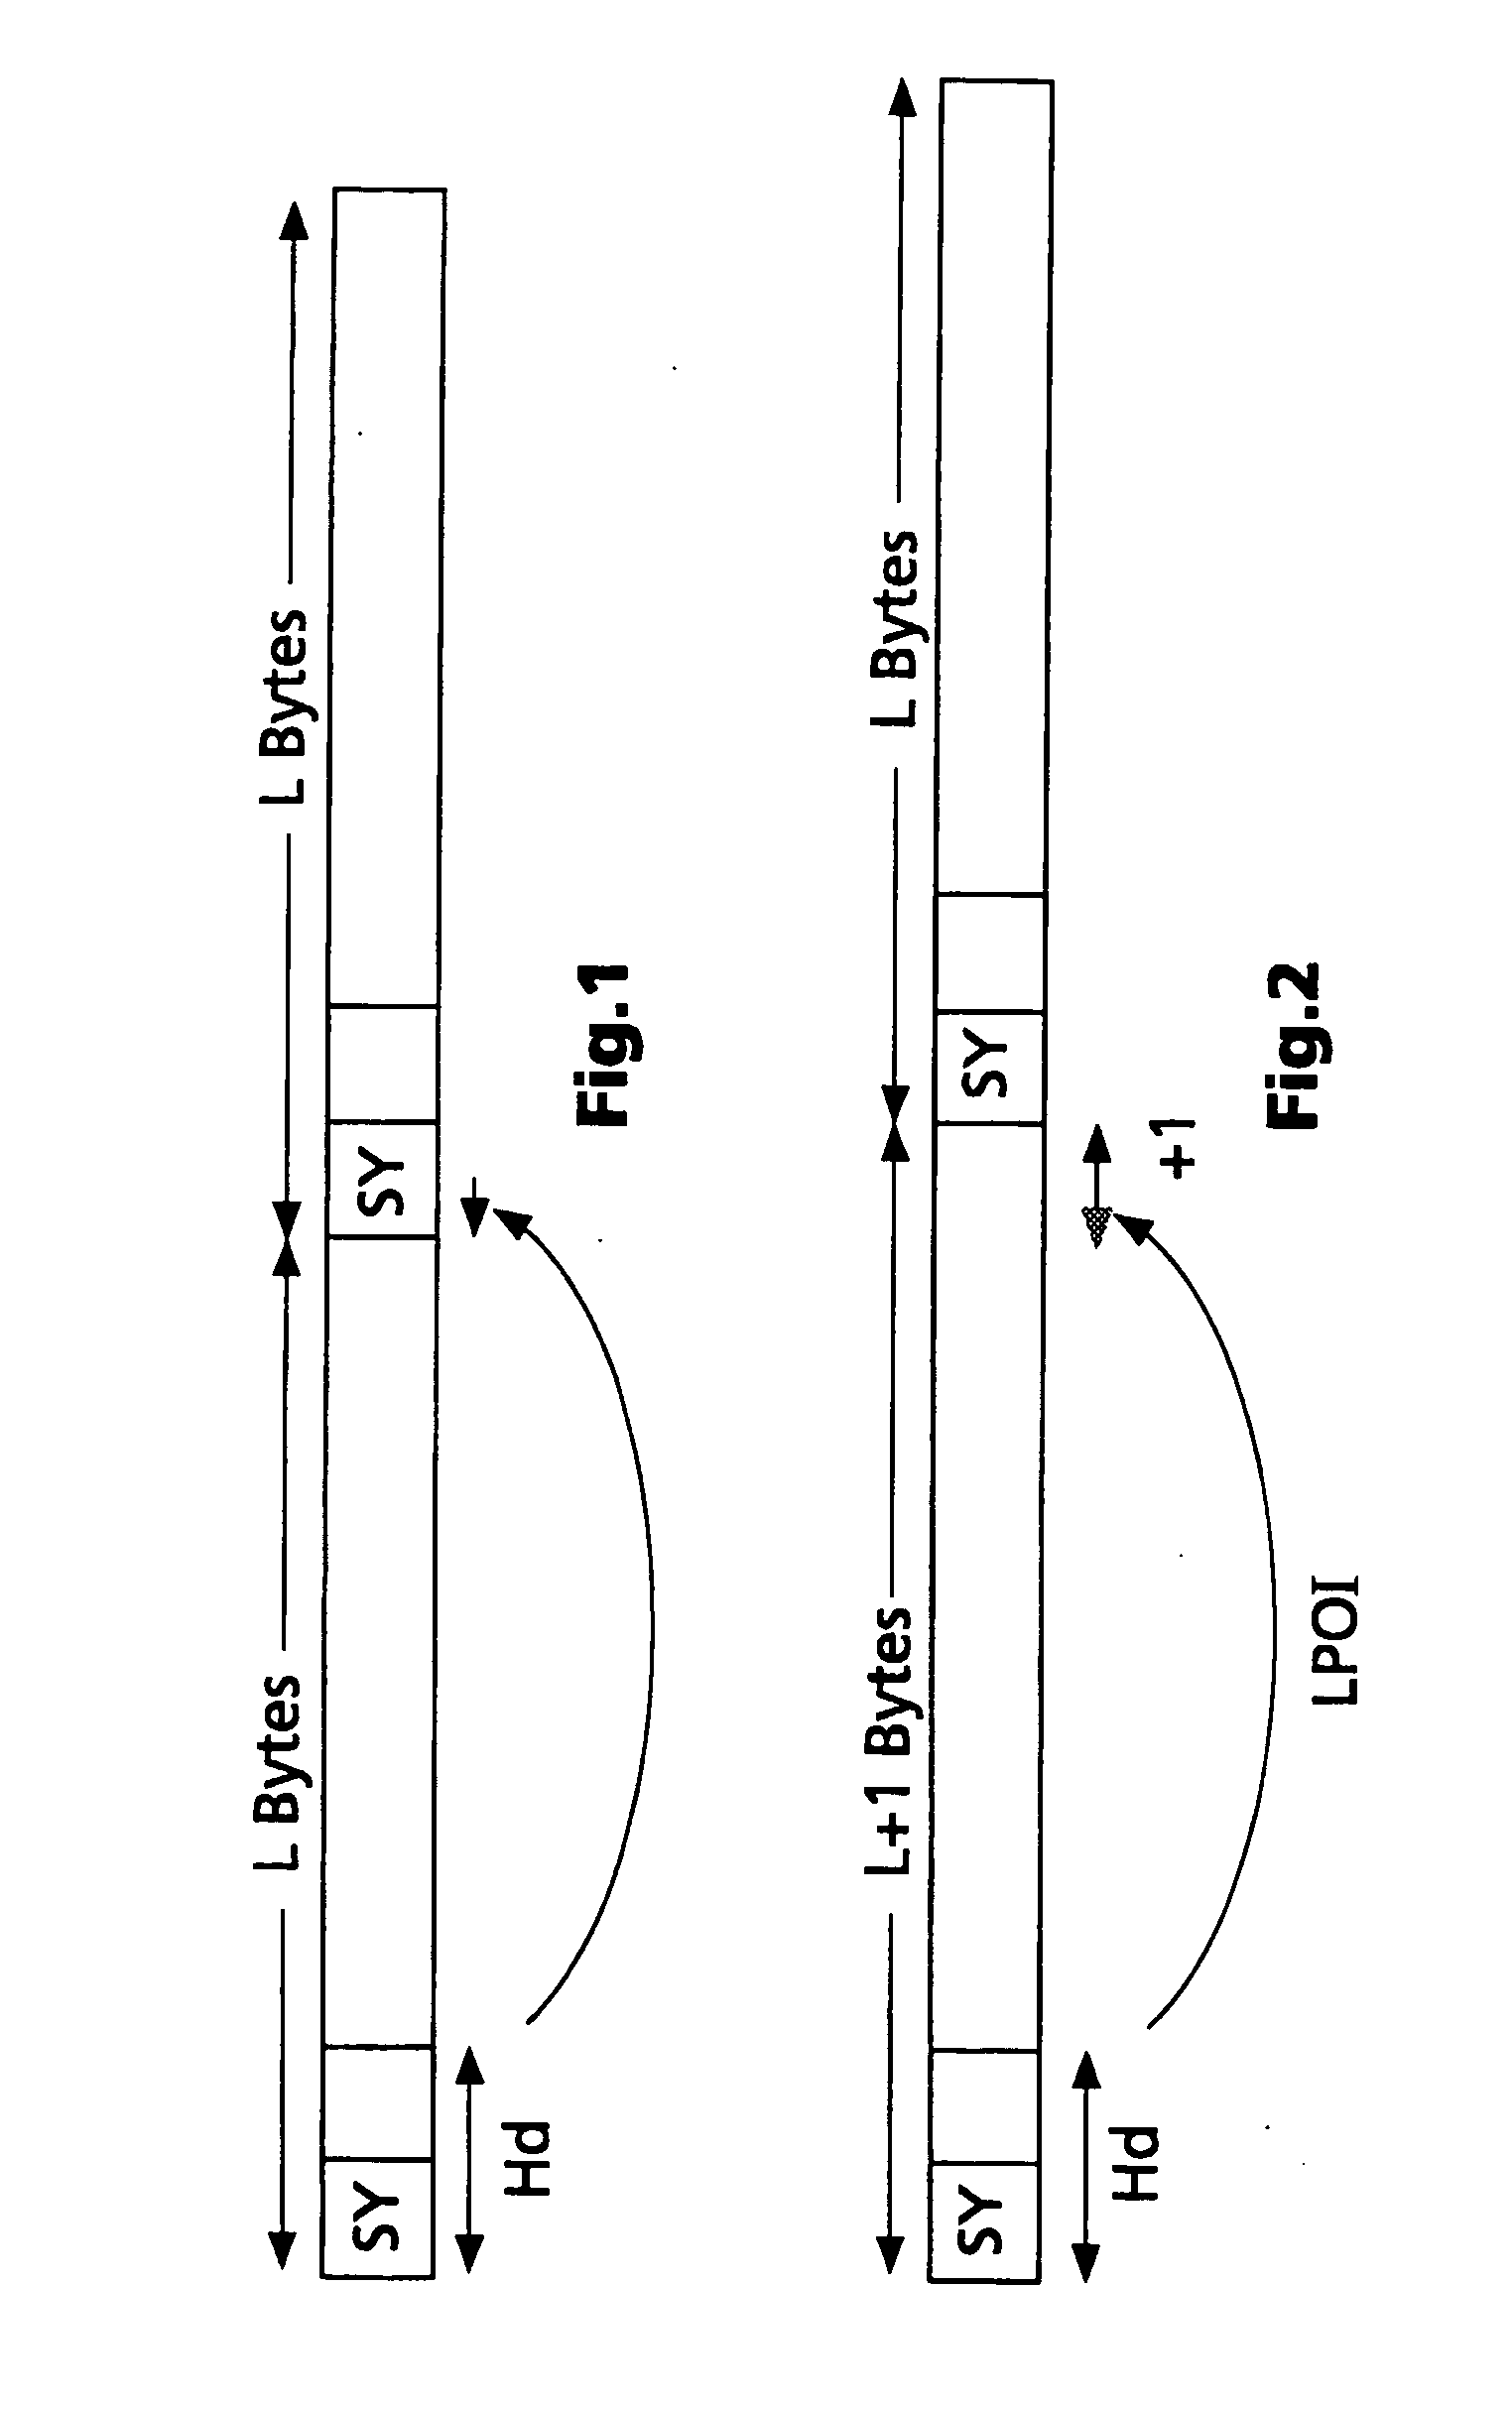 Method and apparatus for decoding a coded digital audio signal which is arranged in frames containing headers